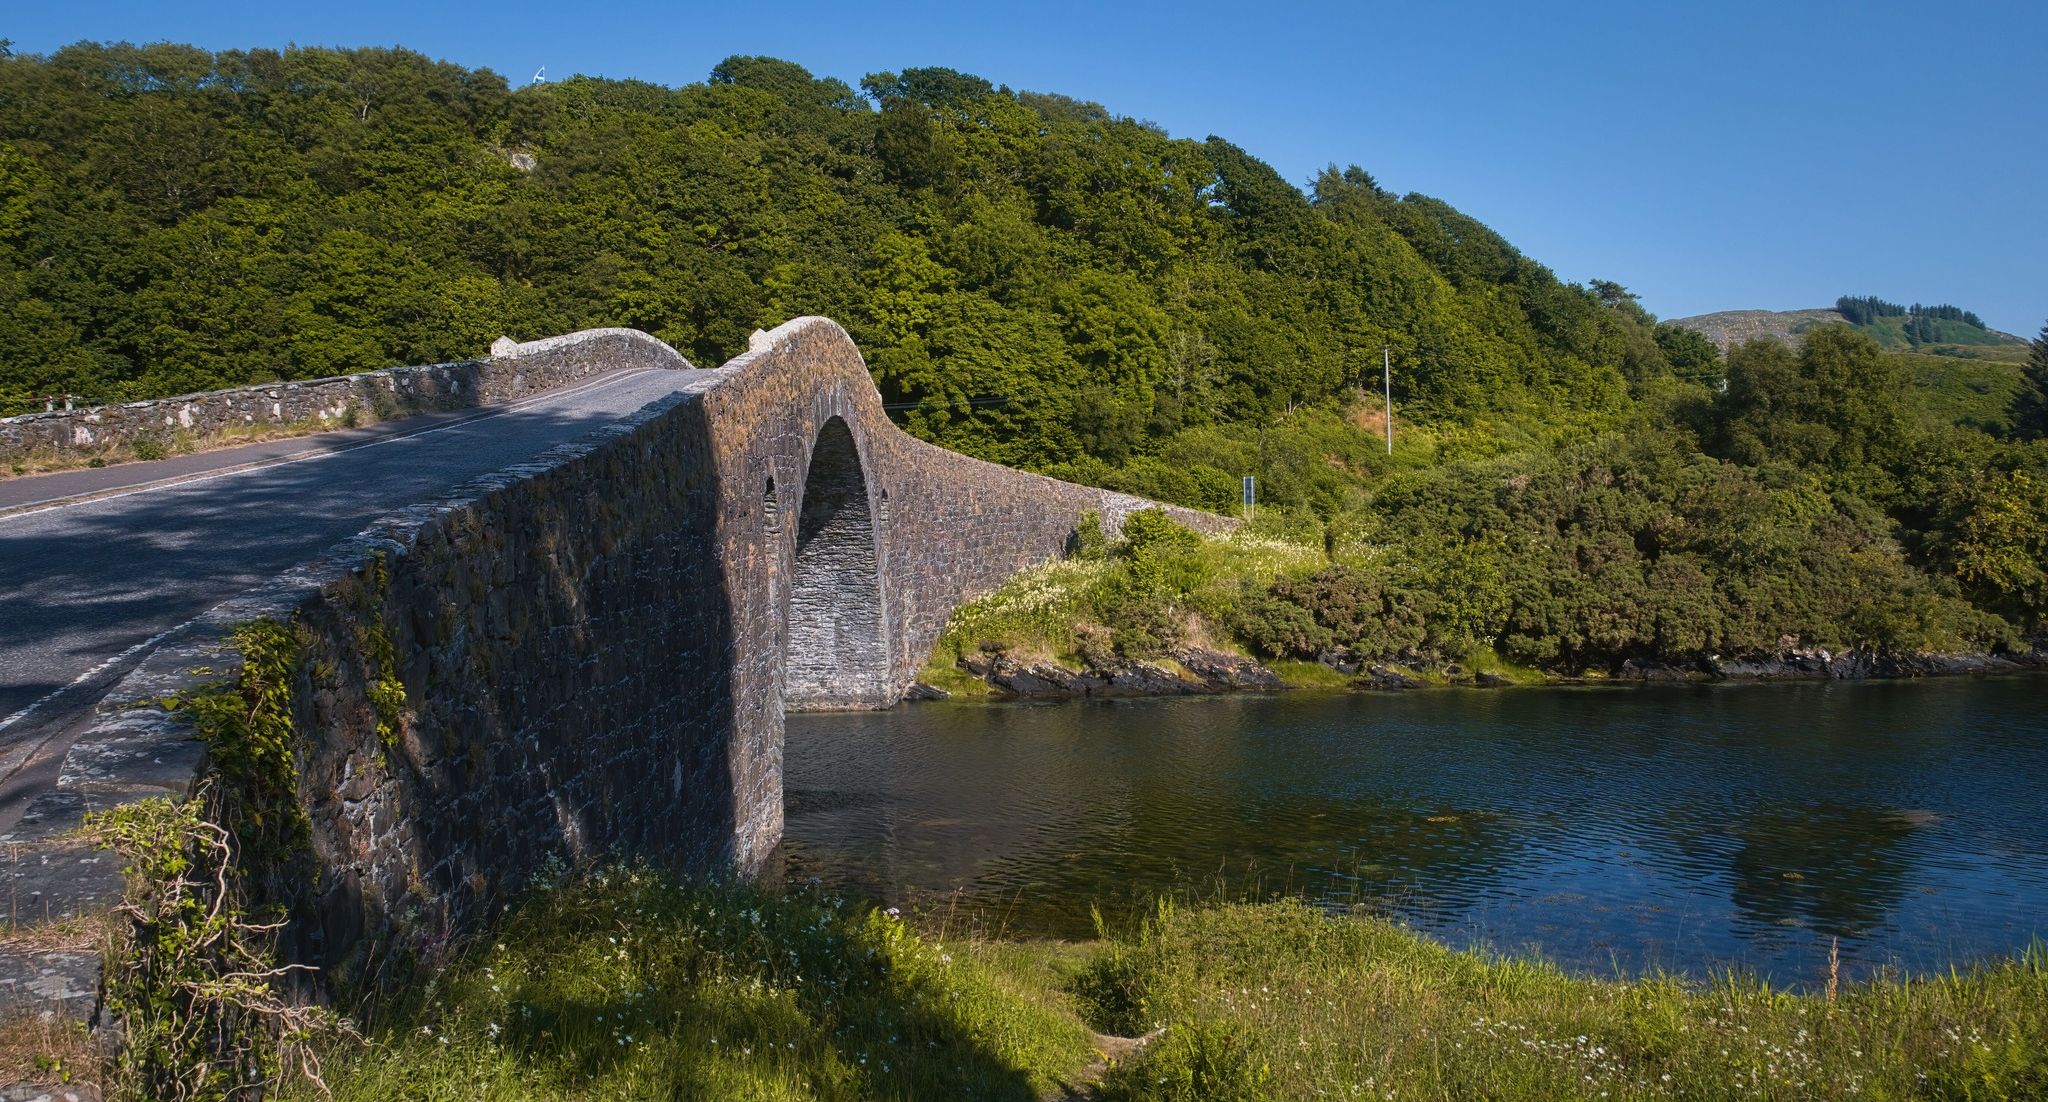 Clachan Bridge ( known as the "Atlantic Bridge" - connects mainland to the Isle of Seil ) off the road to Oban